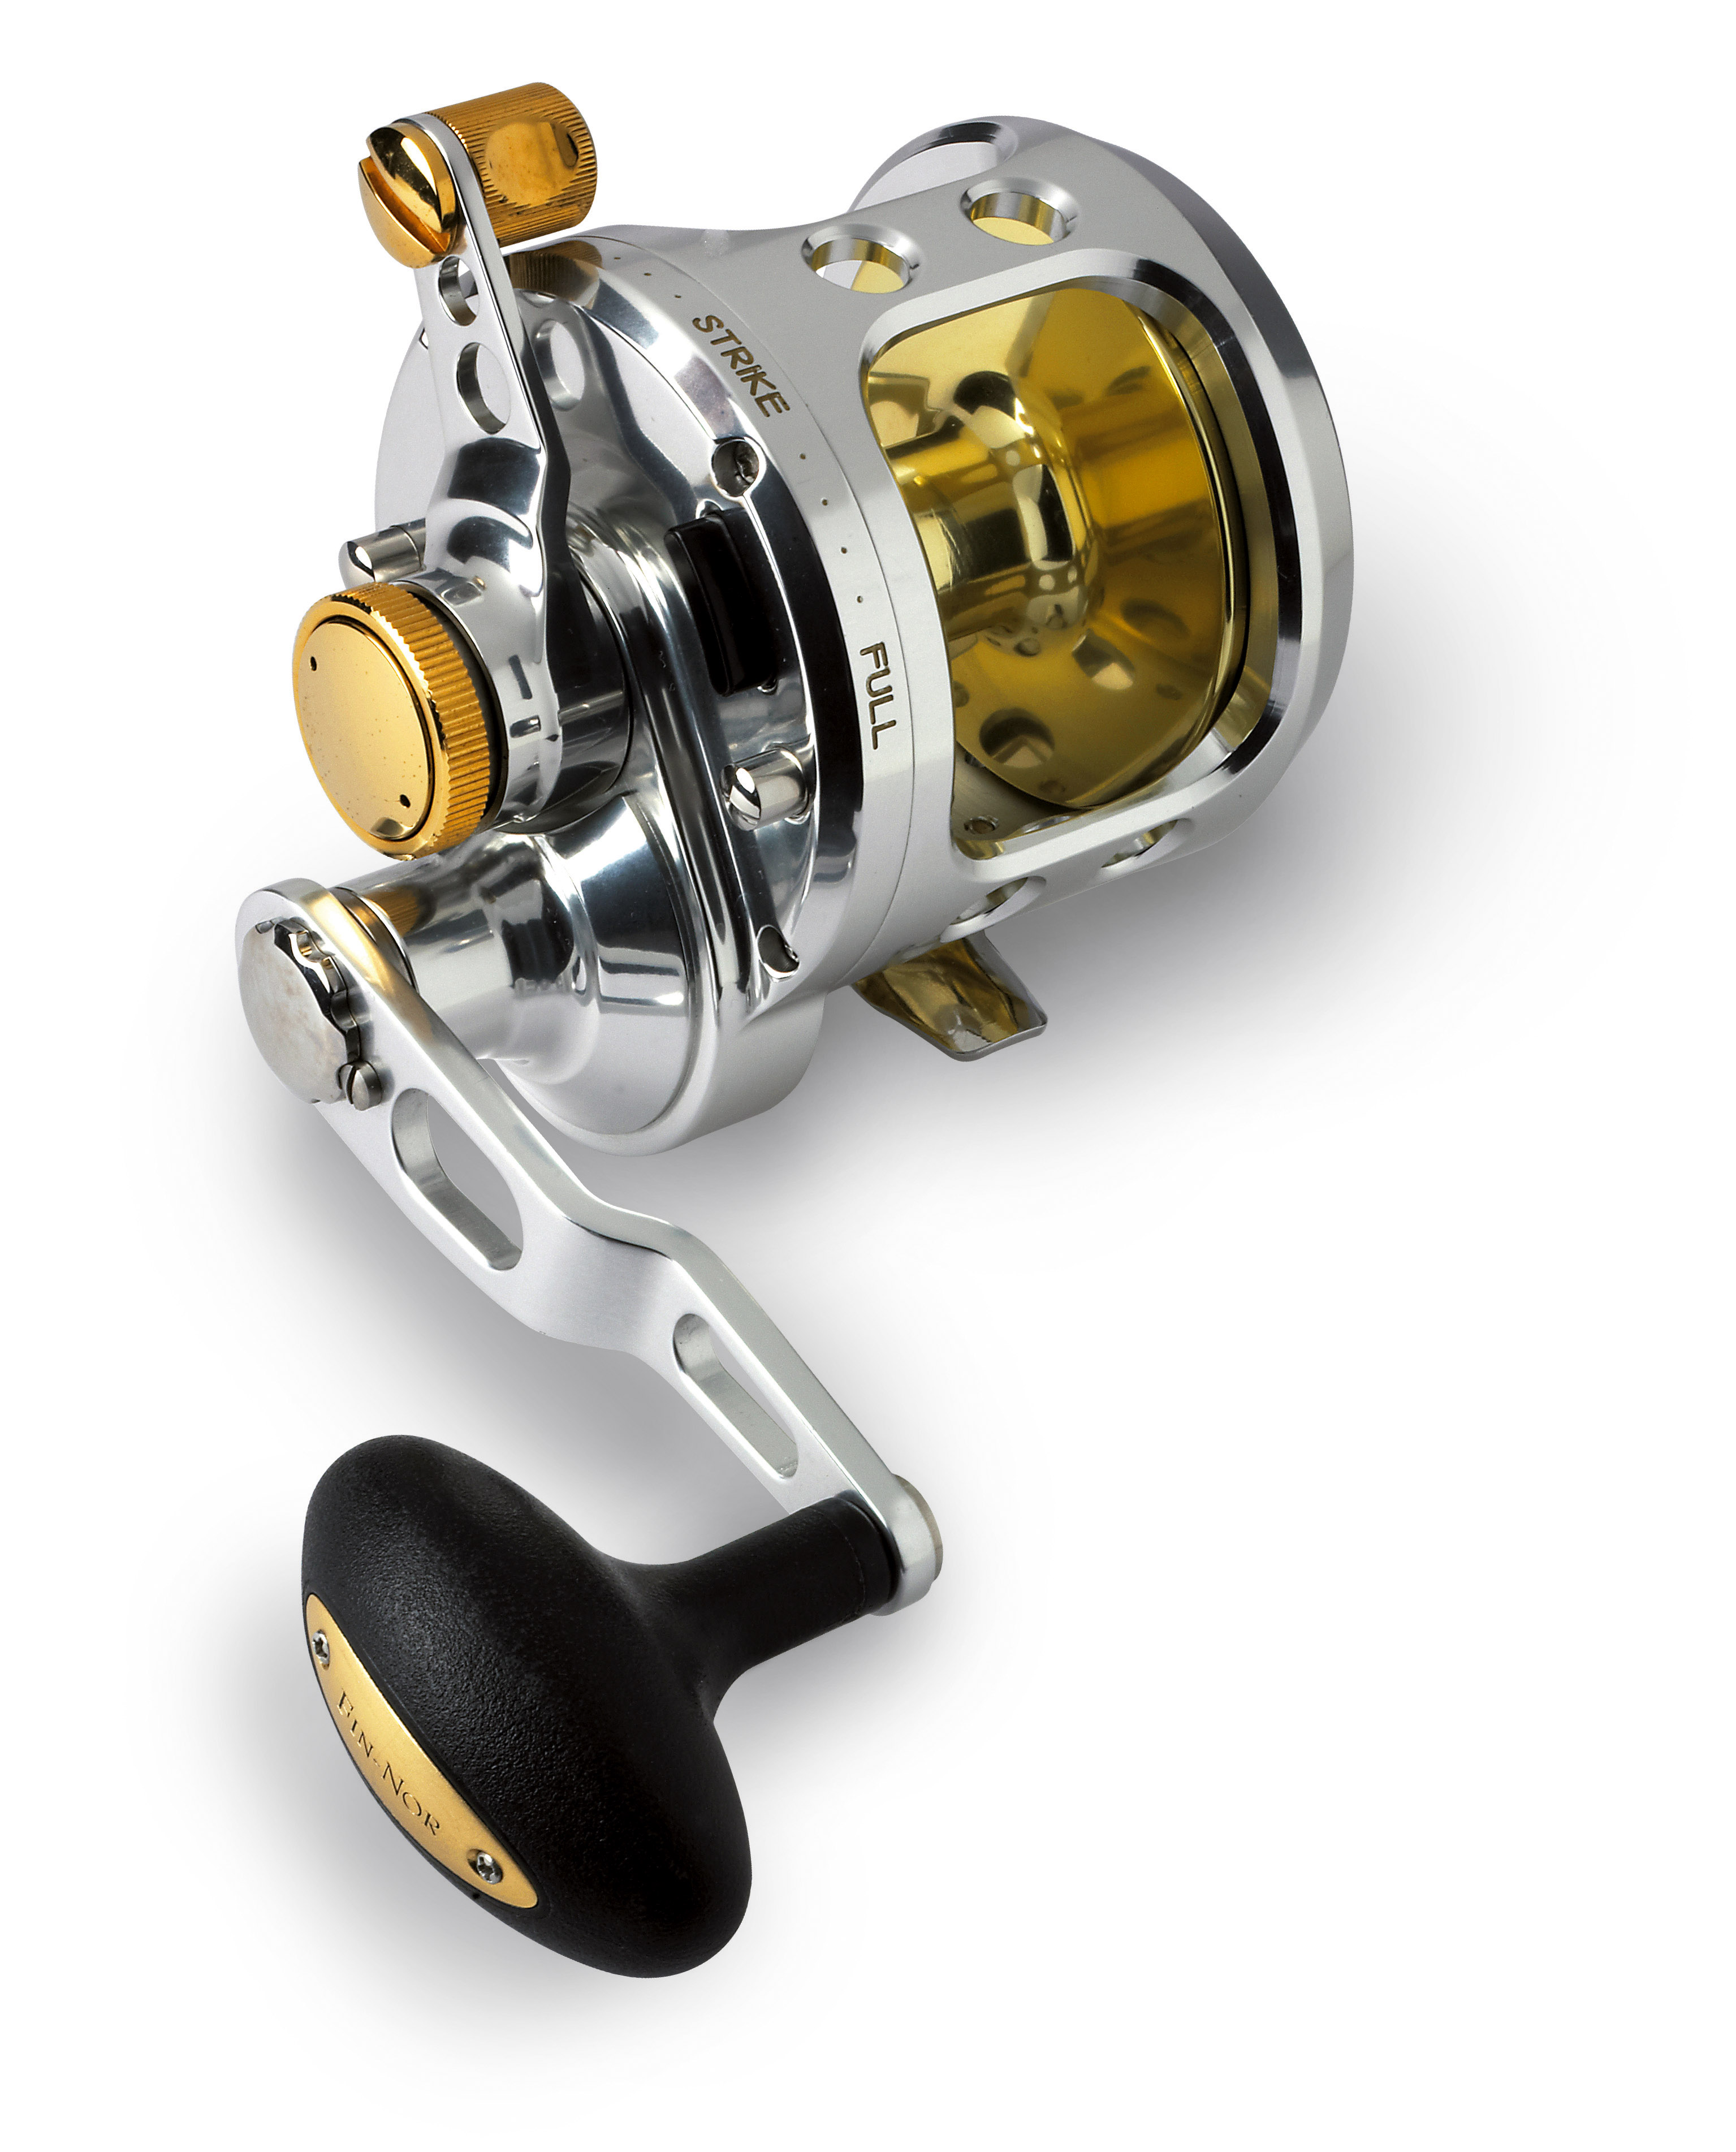 Fin NOR Marquesa multiplier Fishing Reel-All Sizes 